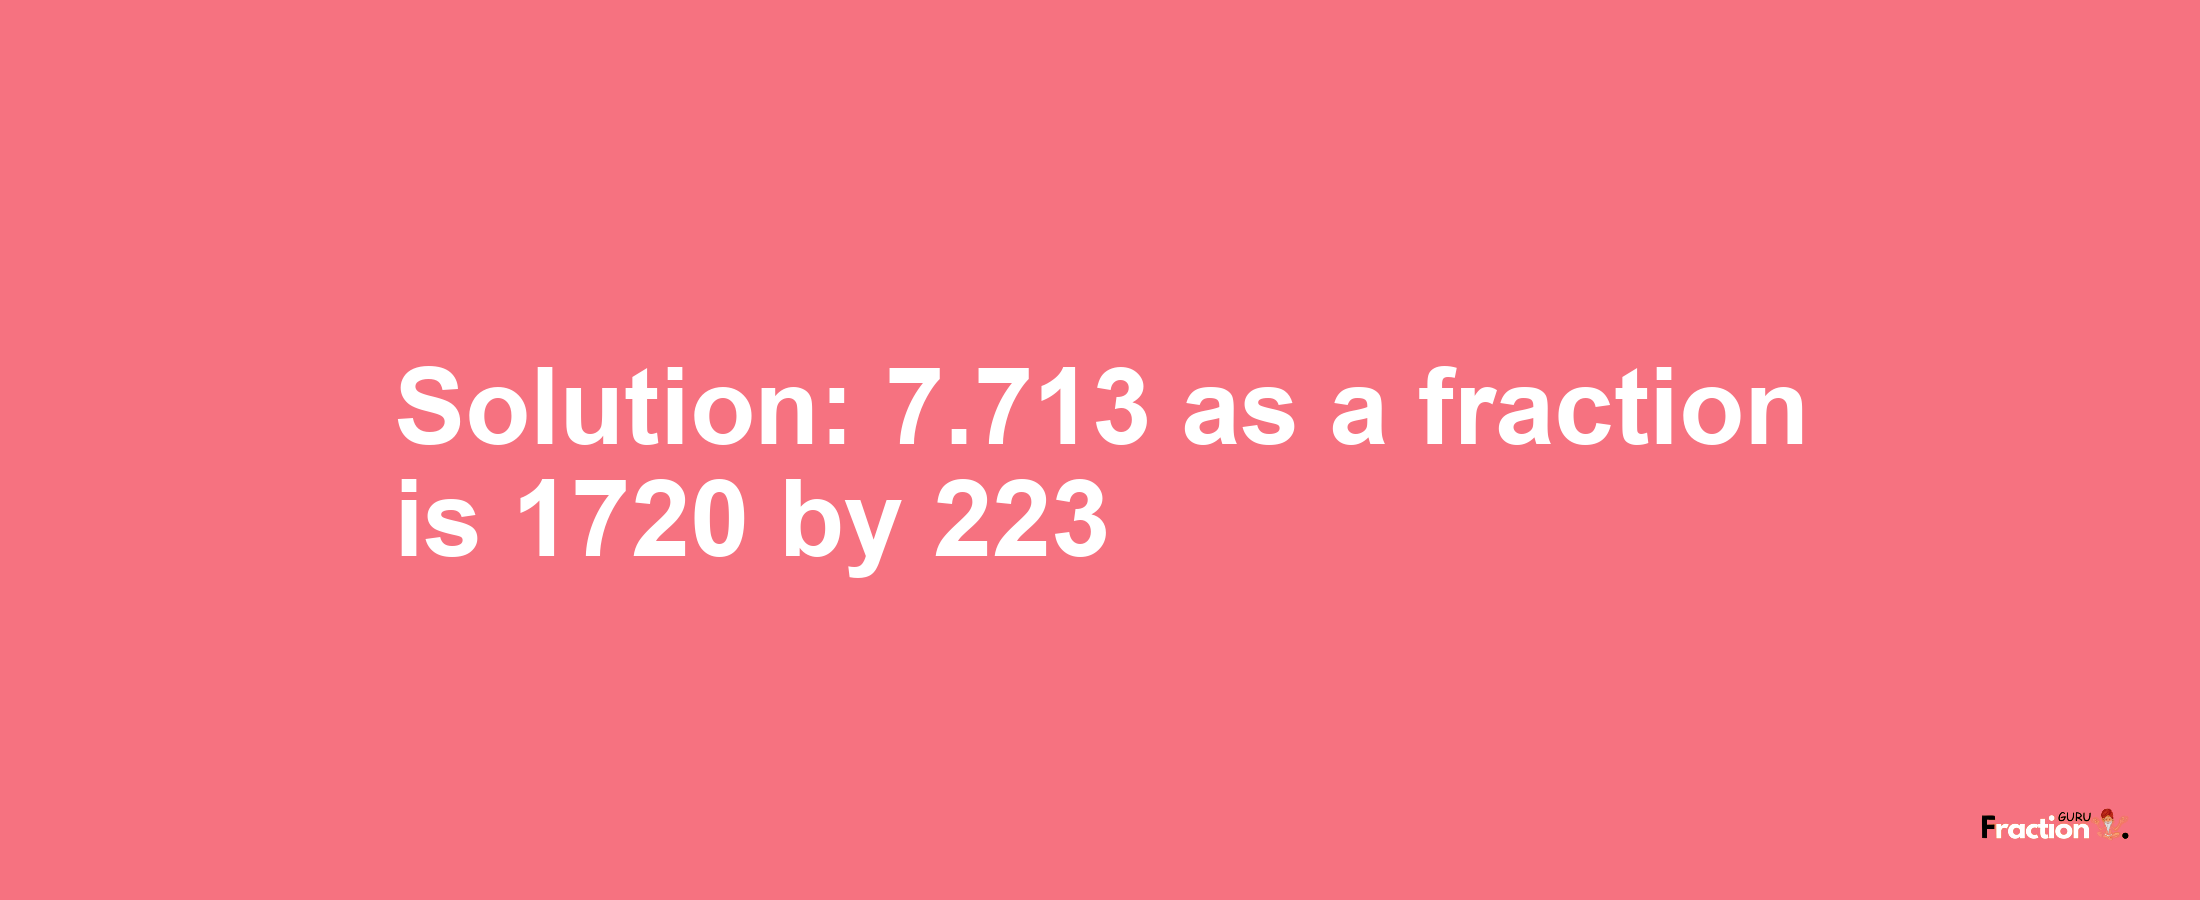 Solution:7.713 as a fraction is 1720/223